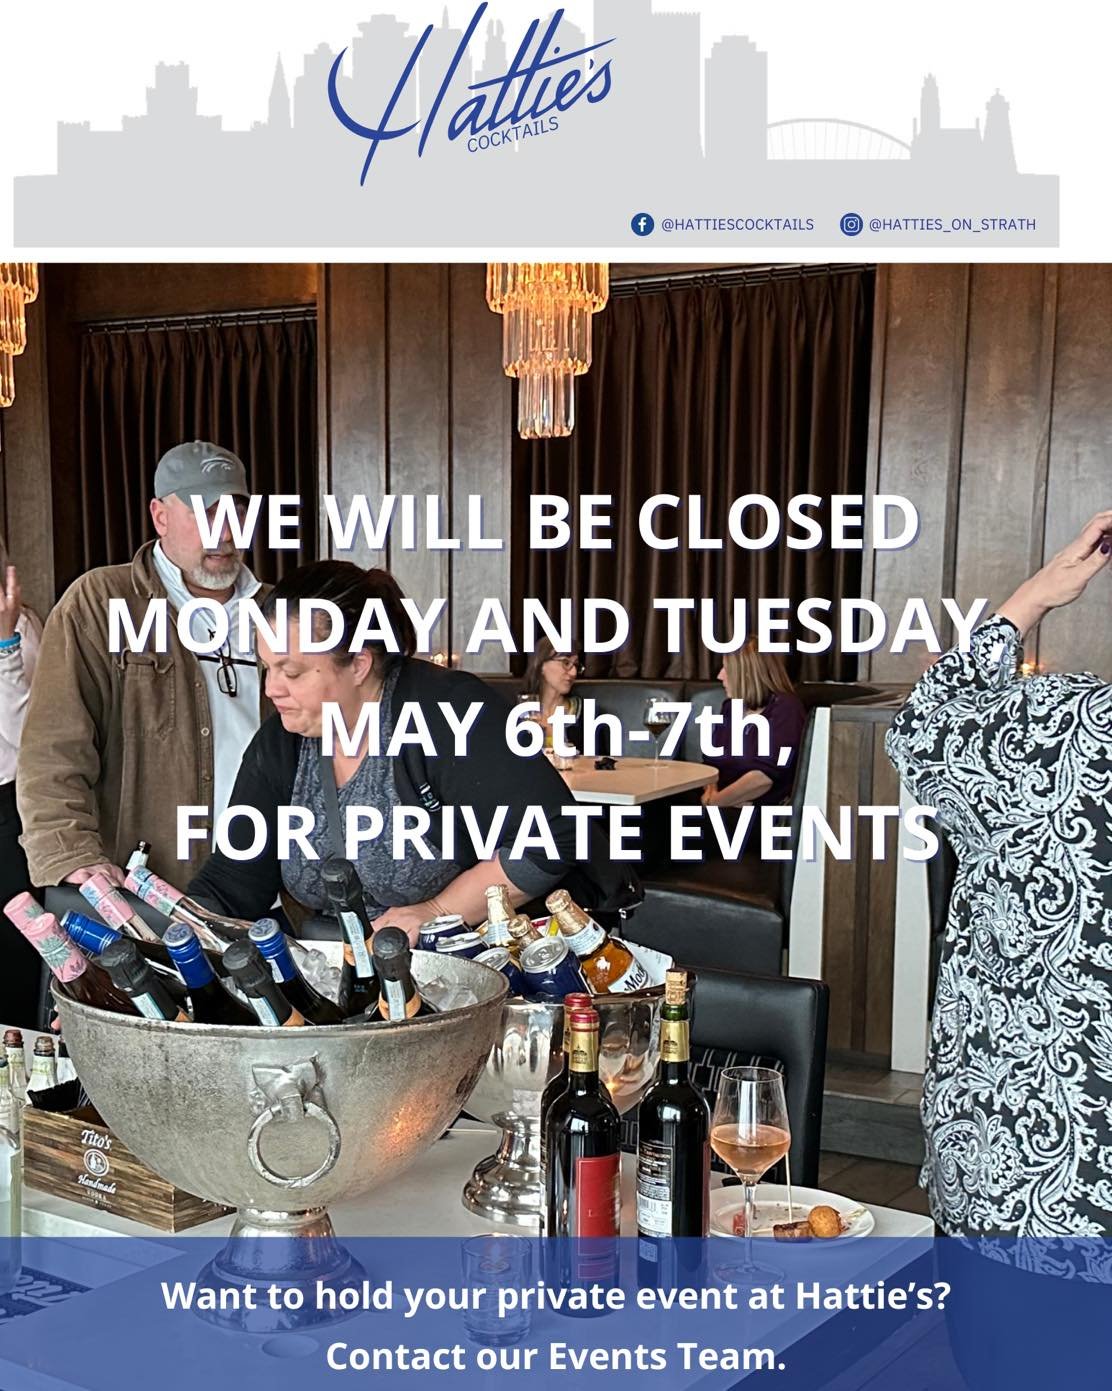 We will be closed Monday-Tuesday, May 6-7th, for private events. Please join us in Char for dinner and drinks.
.
.
.
#roc #rochesterny #rooftopbar